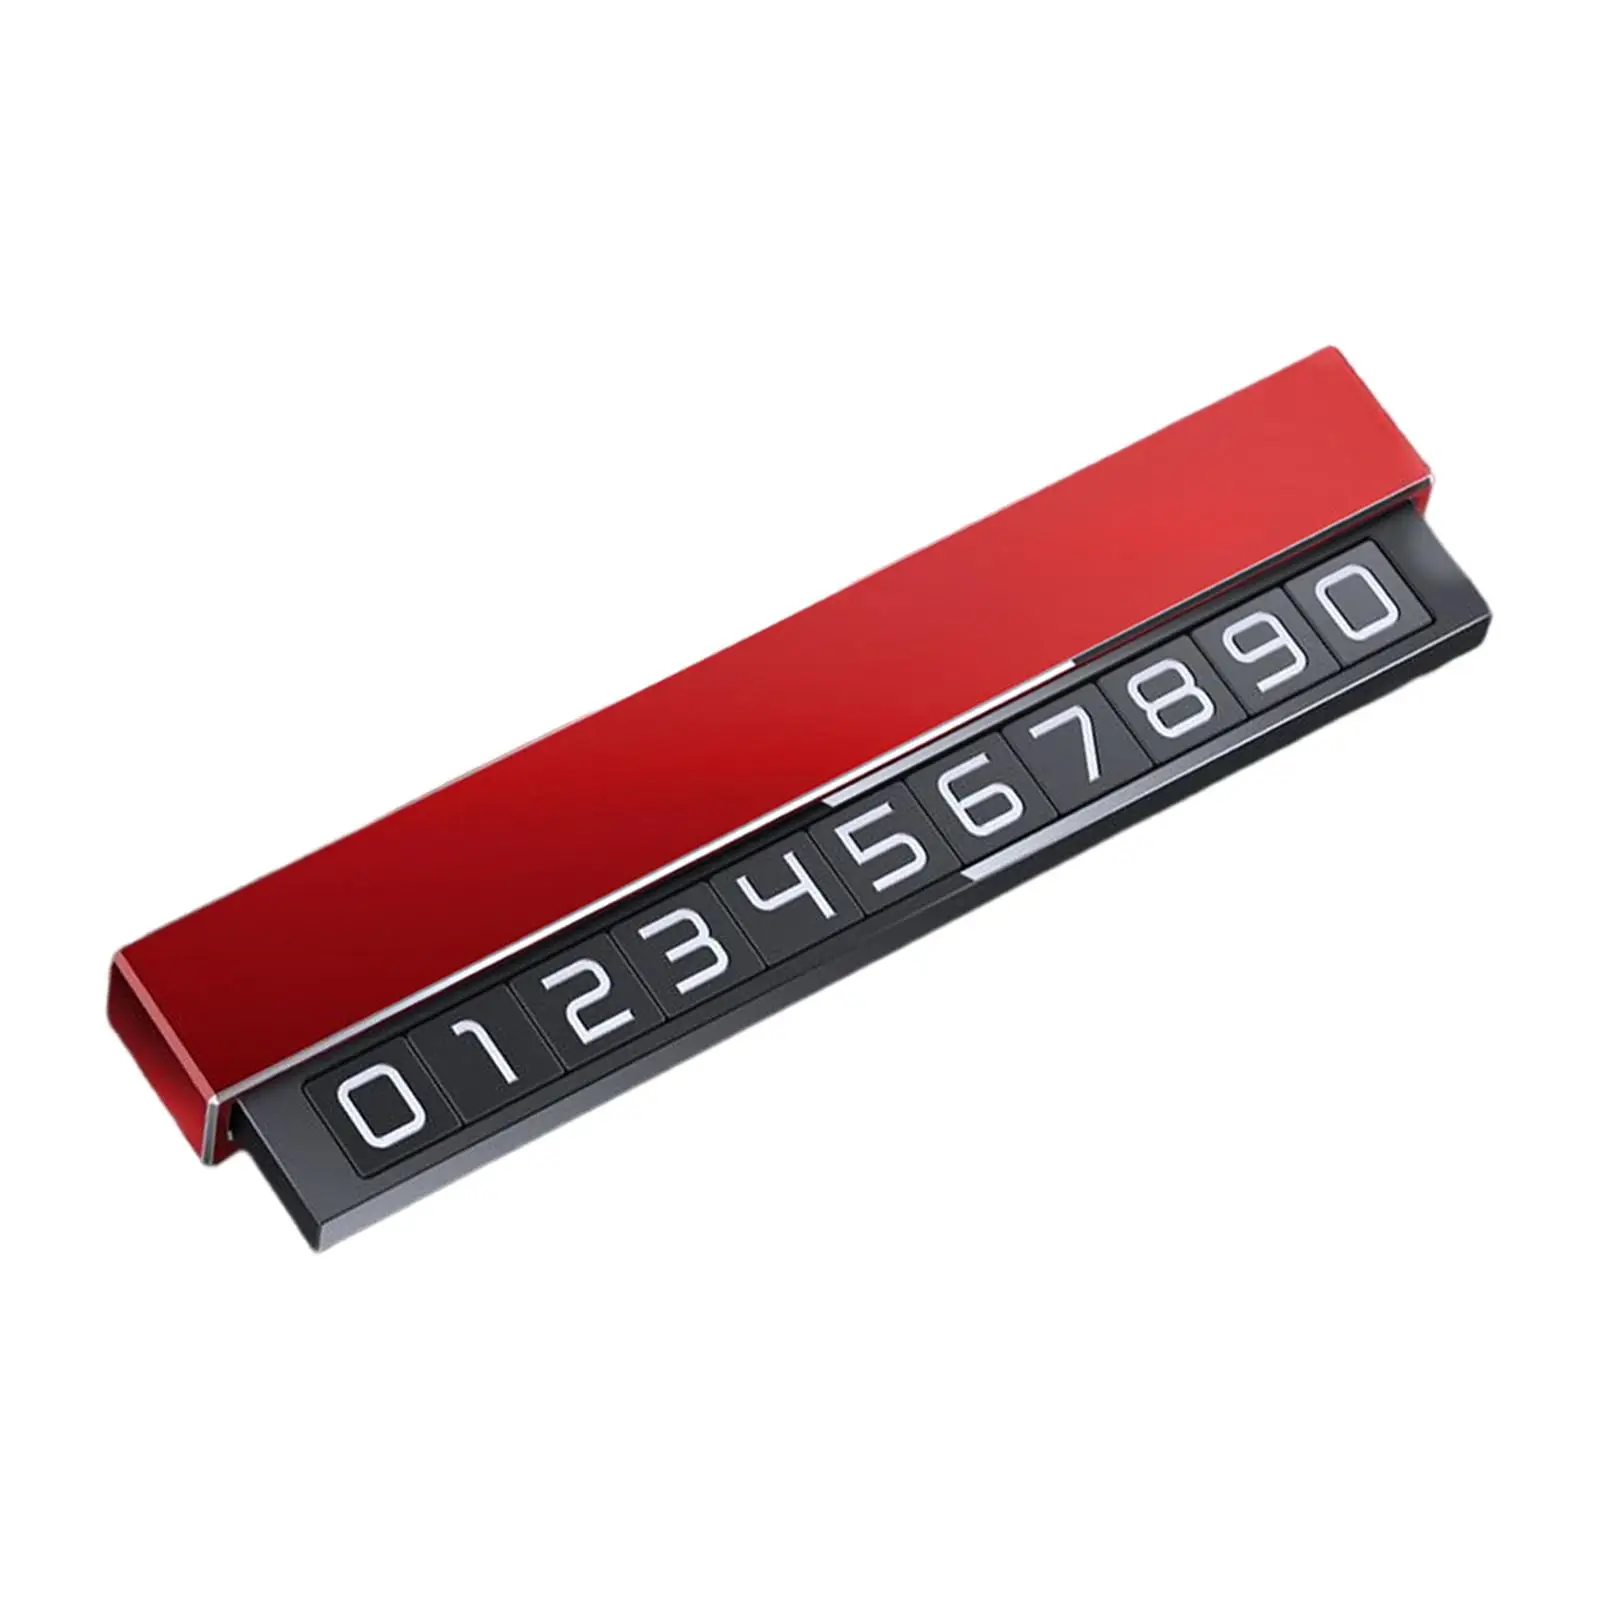 Automobile Parking Number Sign Car Interior Accessories Hidden Moving Notification Phone Number Card for Cars Dashboard